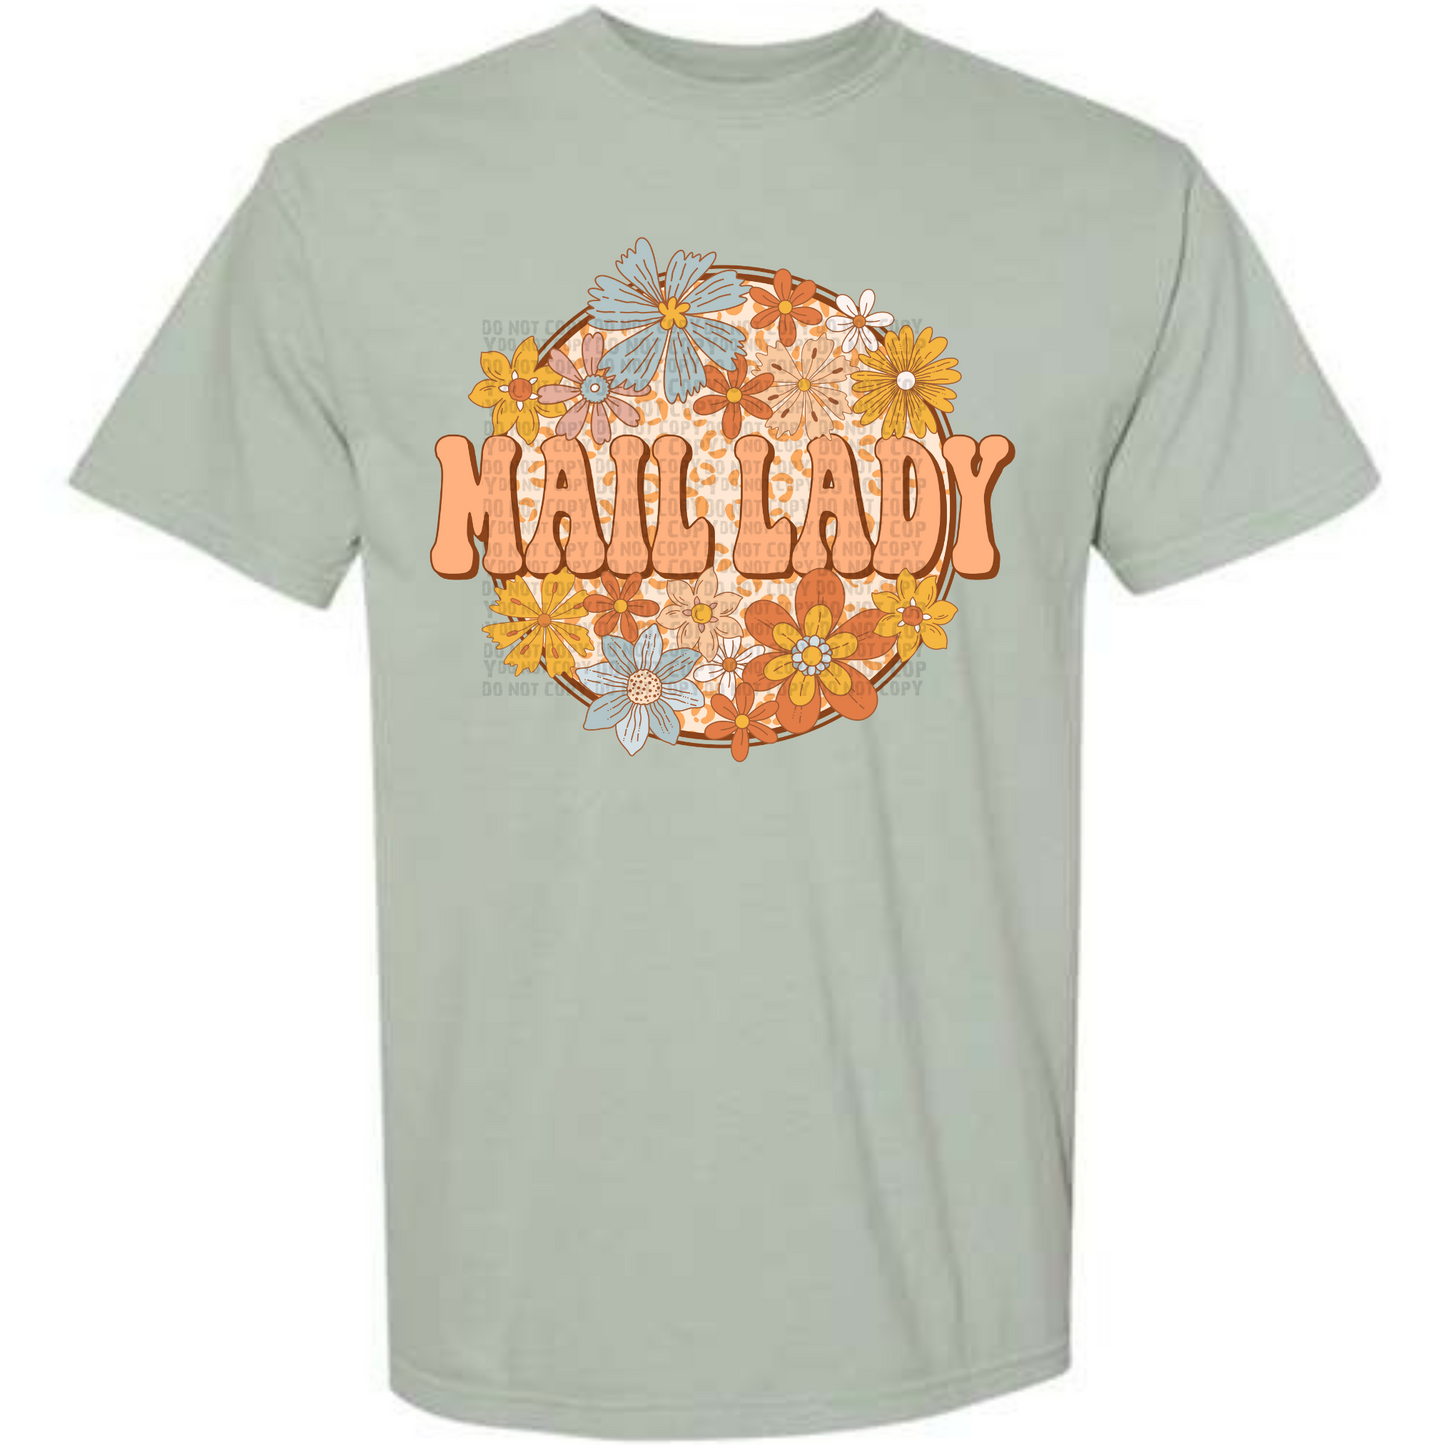 Mail Lady - Floral